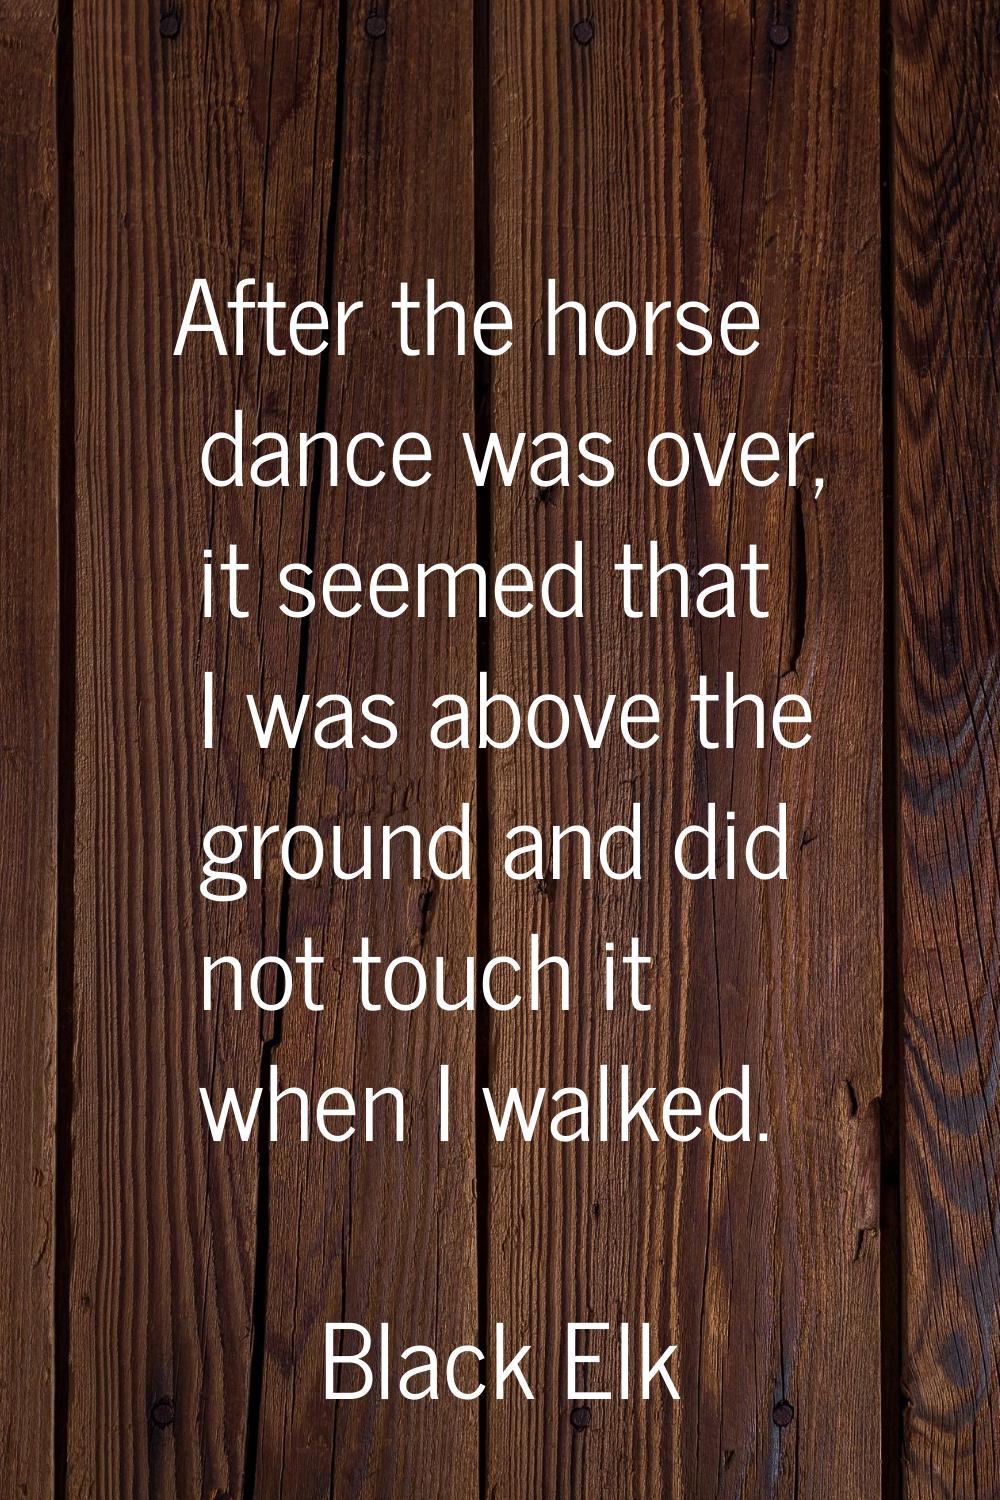 After the horse dance was over, it seemed that I was above the ground and did not touch it when I w